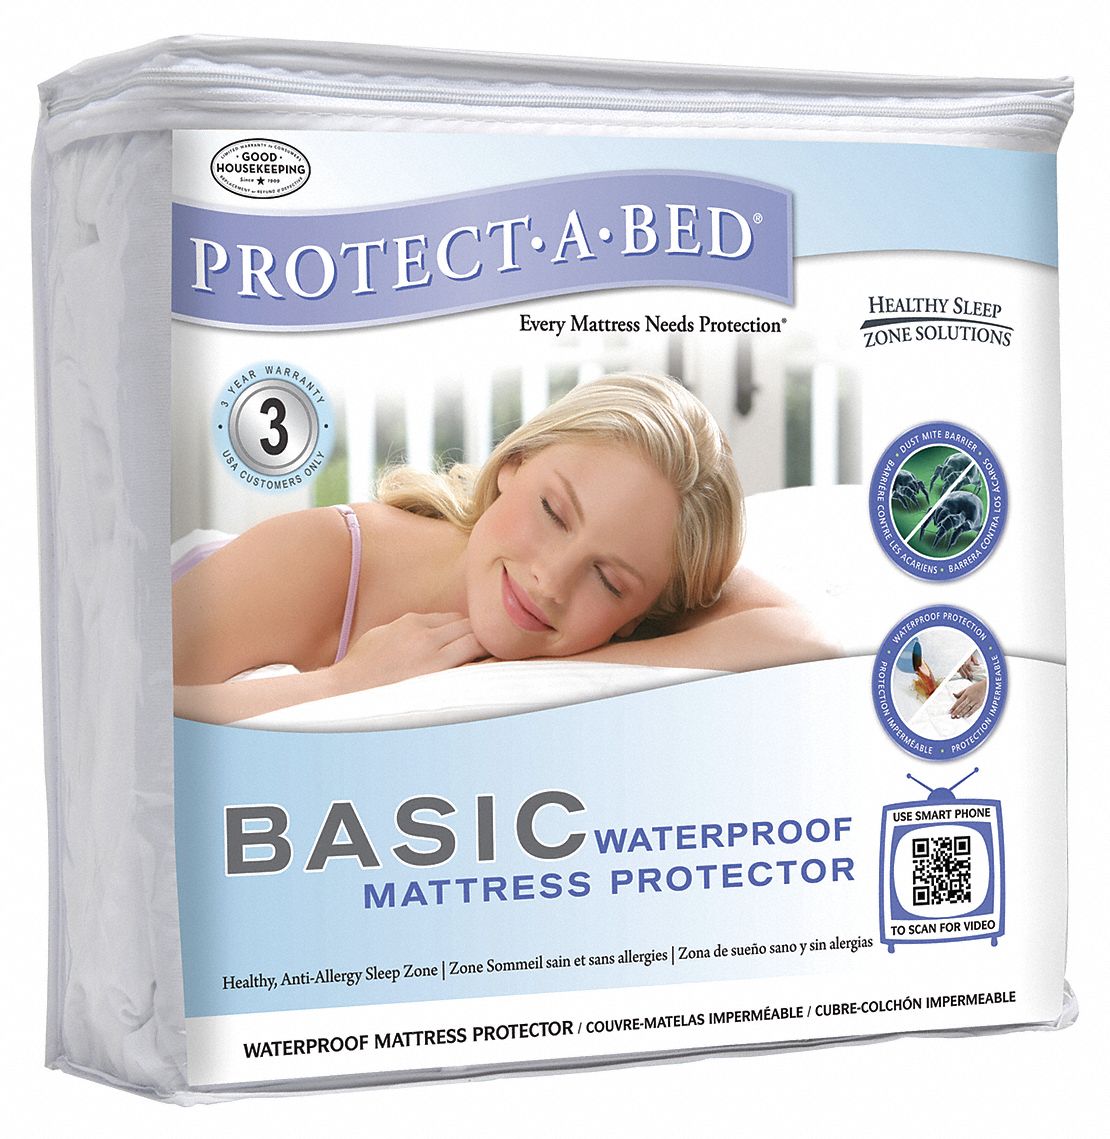 Mattress Pad Protector: Twin XL, 14 in Pocket Size, 80 in Lg, 38 in Wd